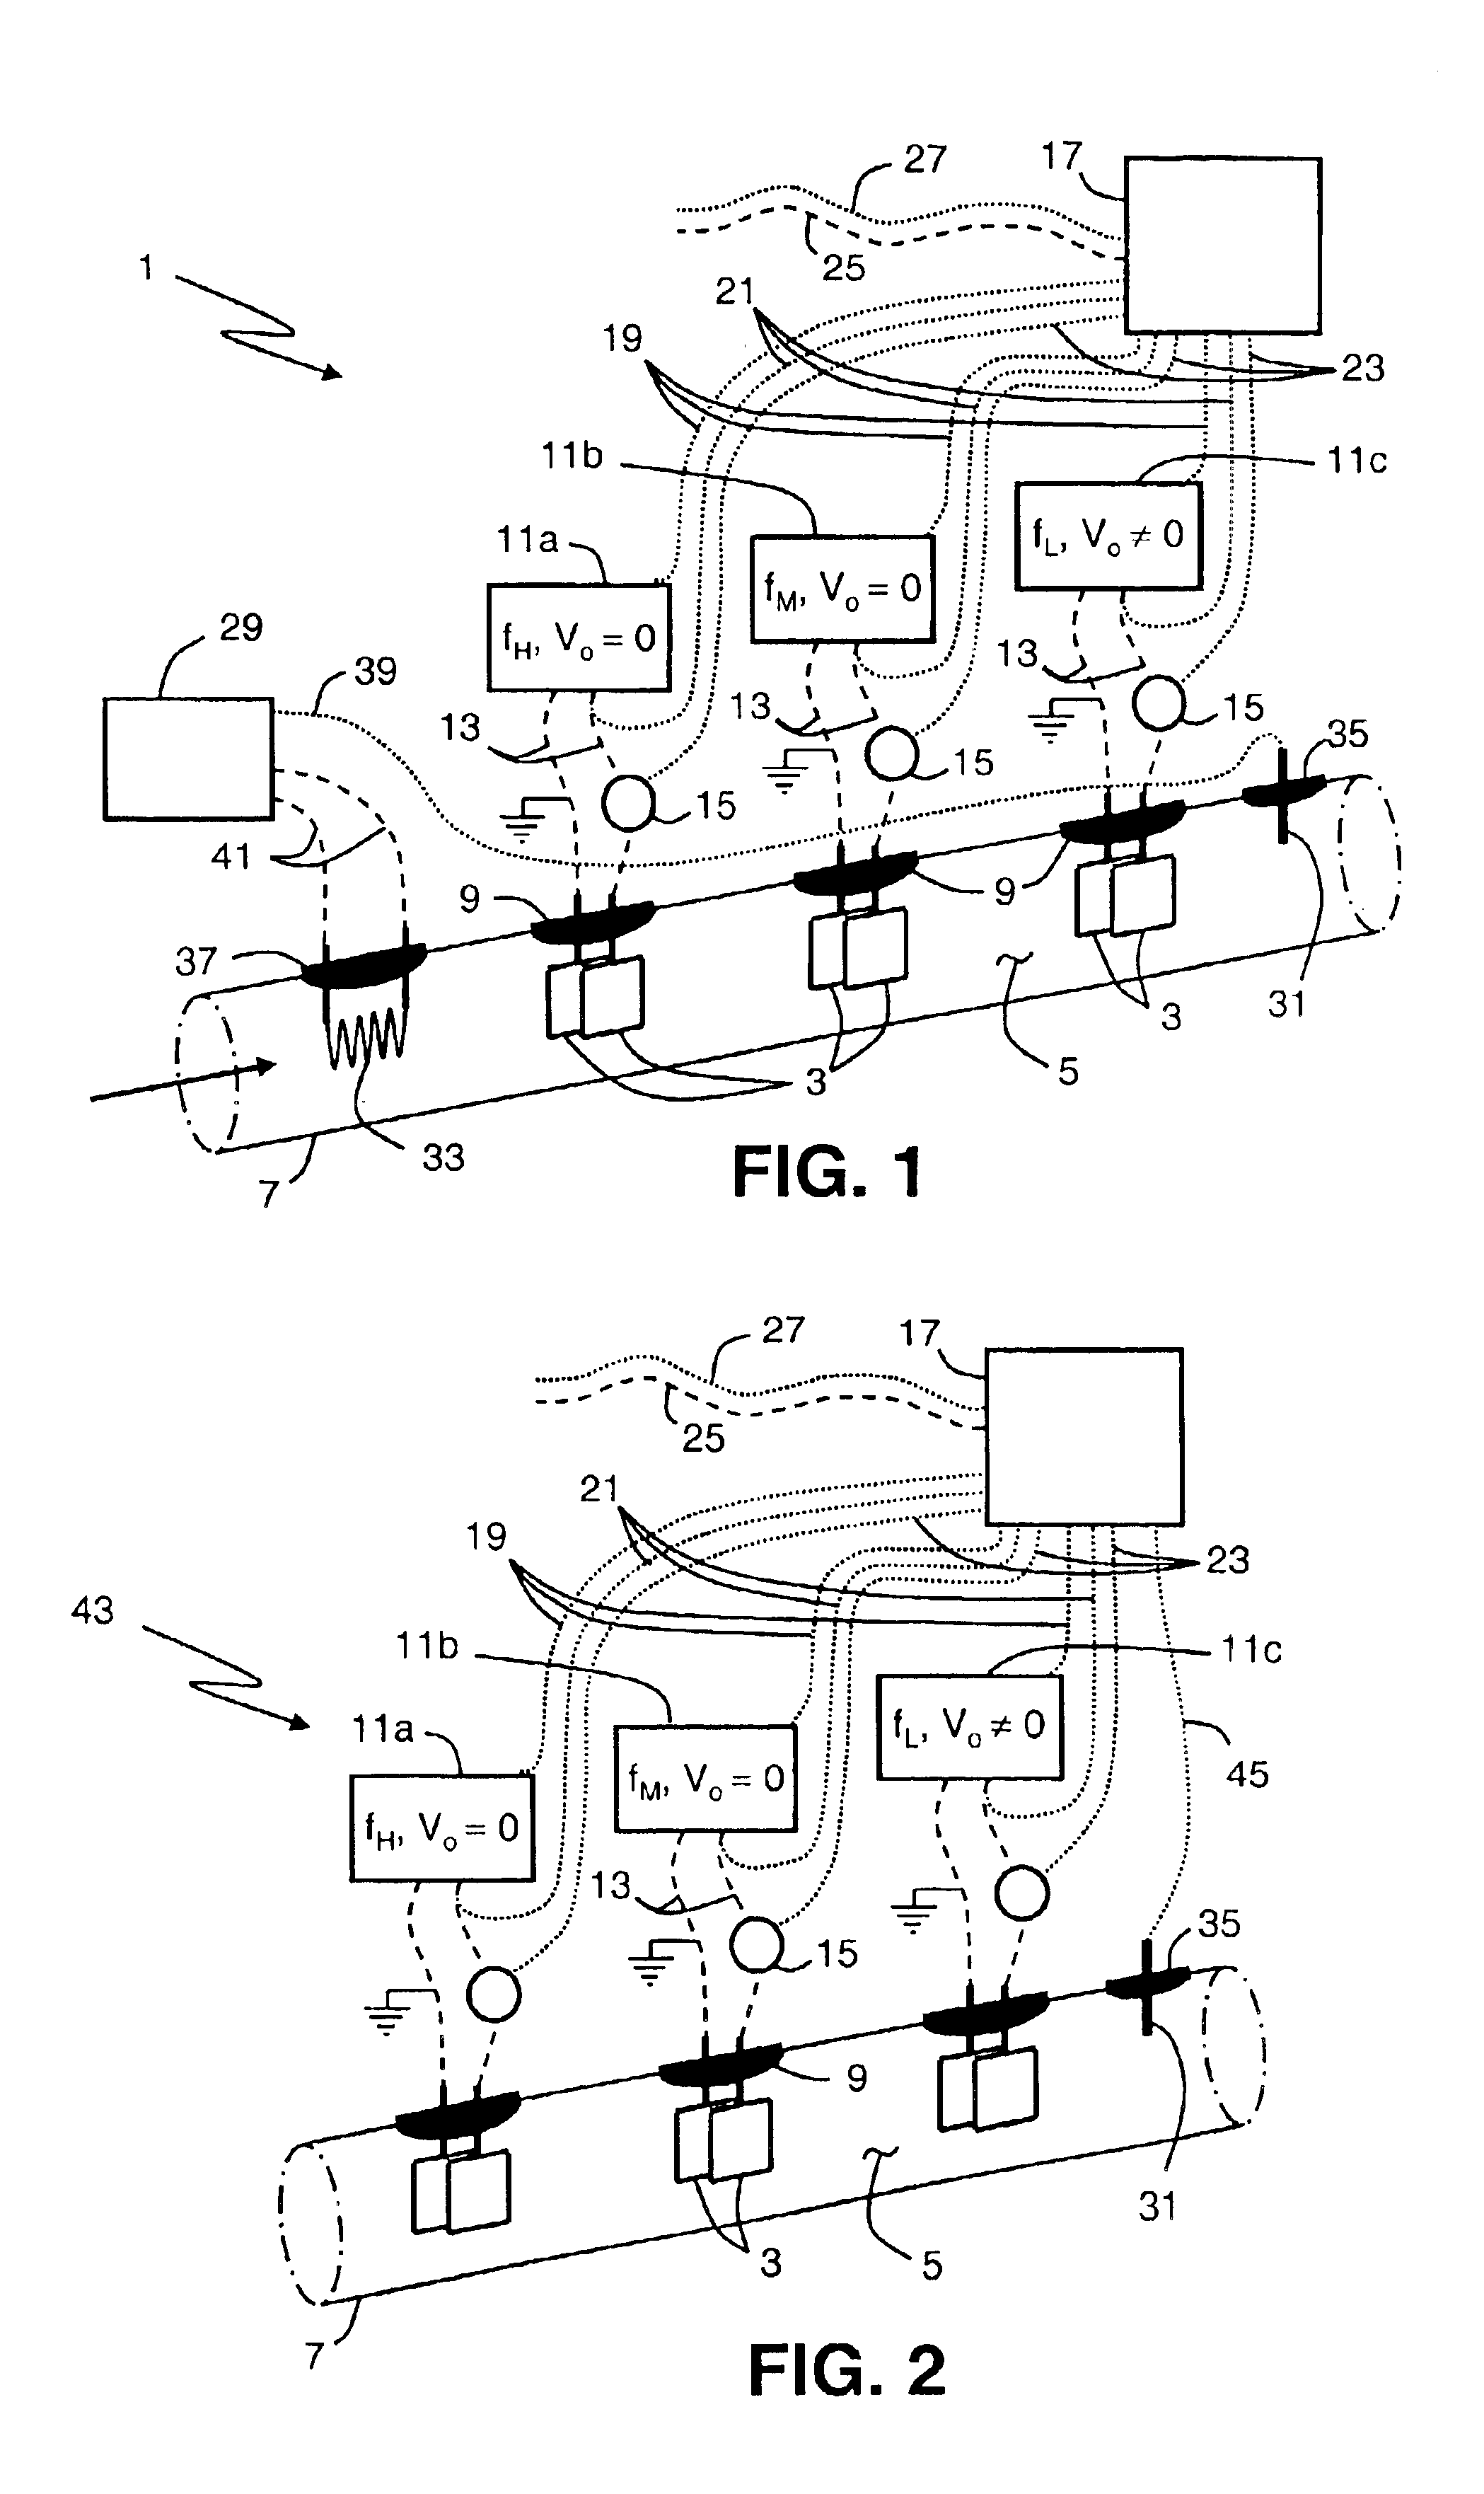 Method for on-line monitoring of quality and condition of non-aqueous fluids